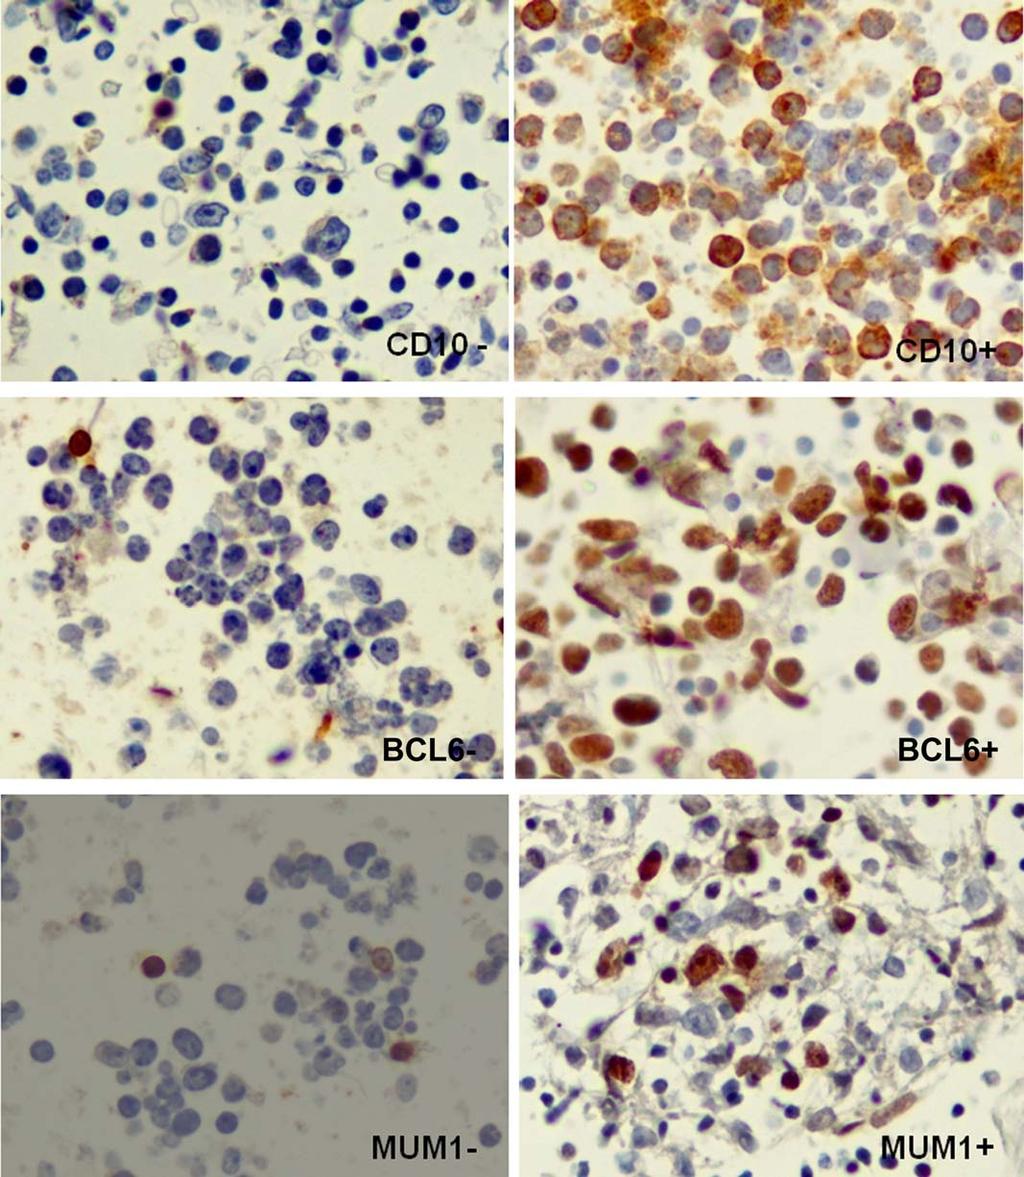 Figure 2. Immunostaining with CD10, B-cell lymphoma 6 (BCL6), and multiple myeloma oncogene 1 (MUM1) in diffuse large B-cell lymphoma cell blocks.